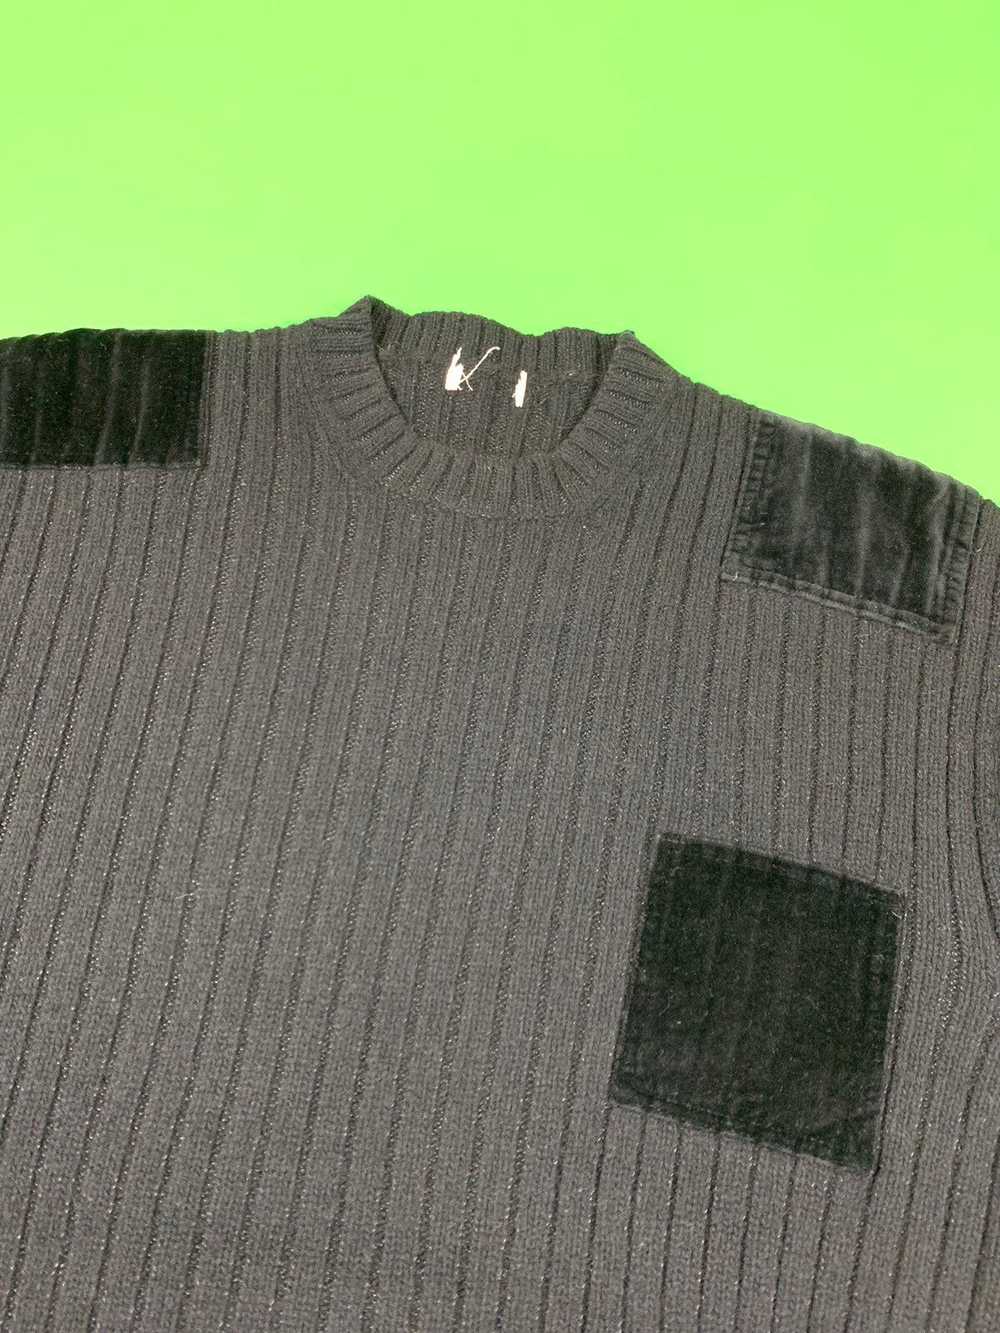 Helmut Lang AW 98 Archive Wool Knit Ribbed Milita… - image 4